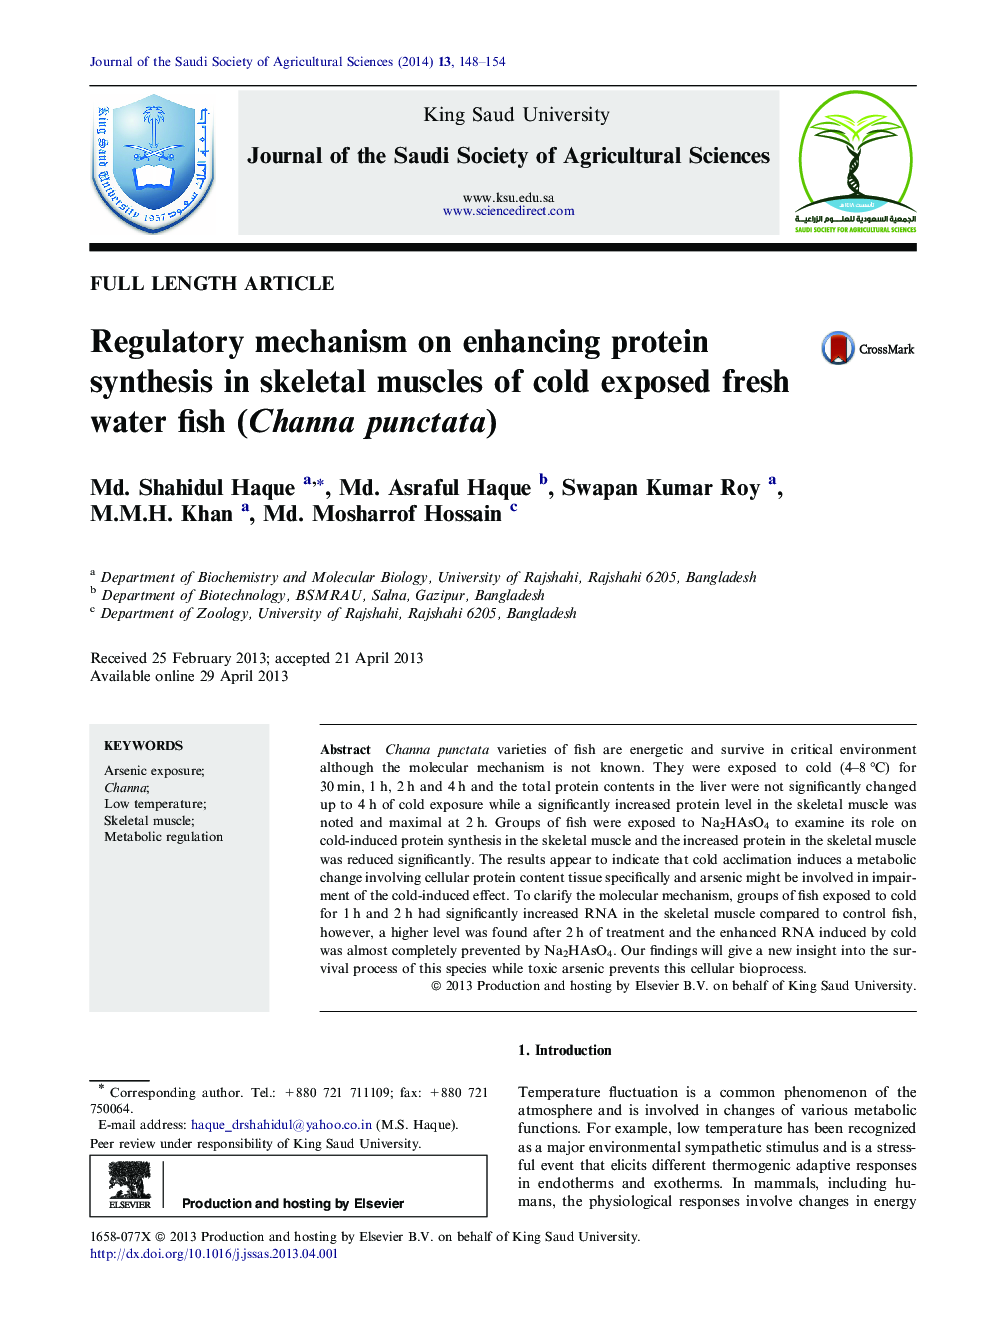 Regulatory mechanism on enhancing protein synthesis in skeletal muscles of cold exposed fresh water fish (Channa punctata) 